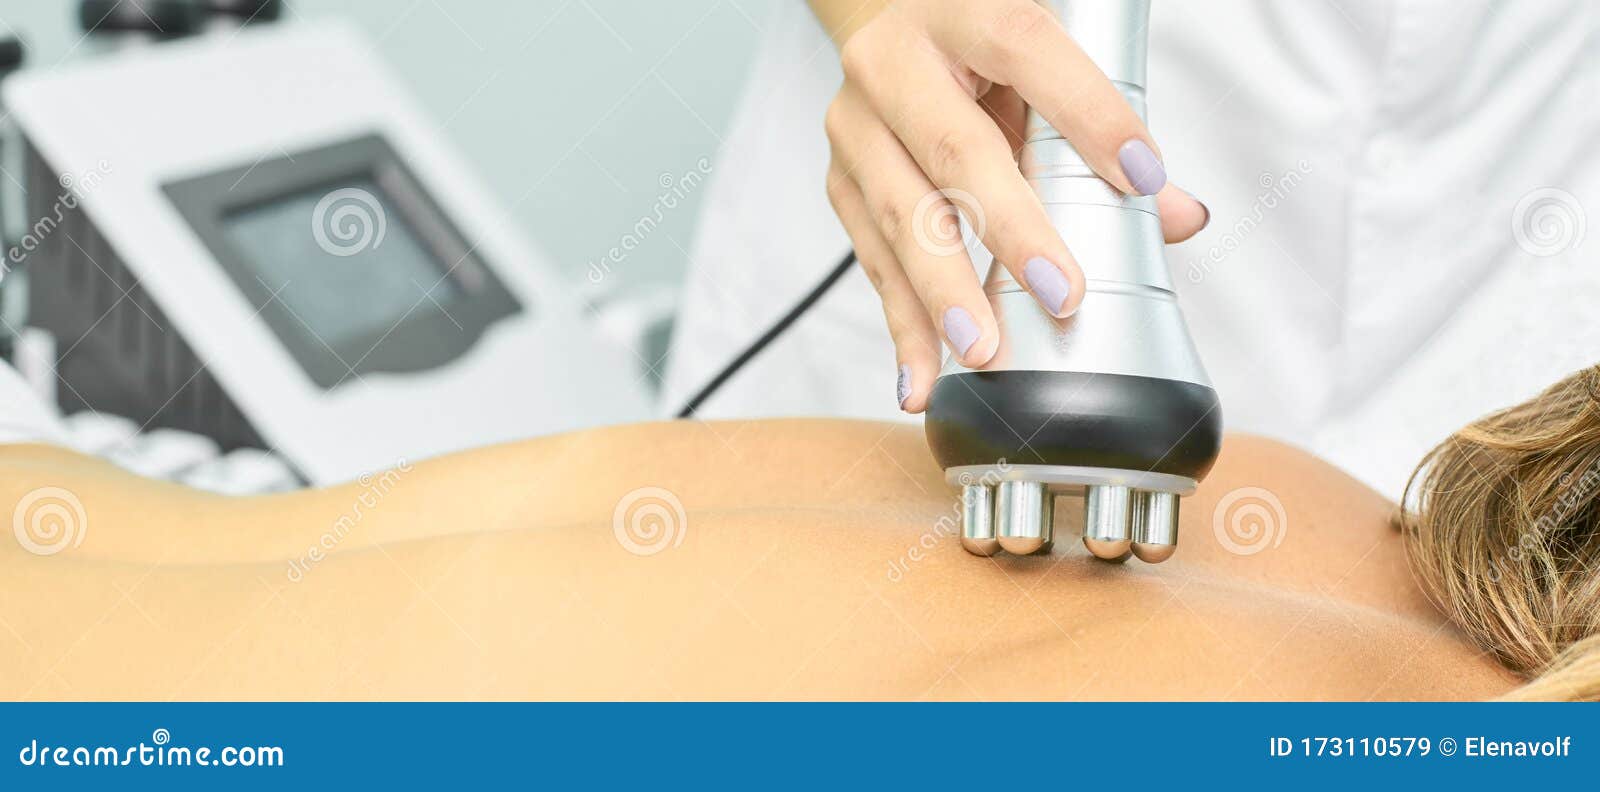 perfect radio treatment. woman at spa procedure. doctor hand and girl body. rf